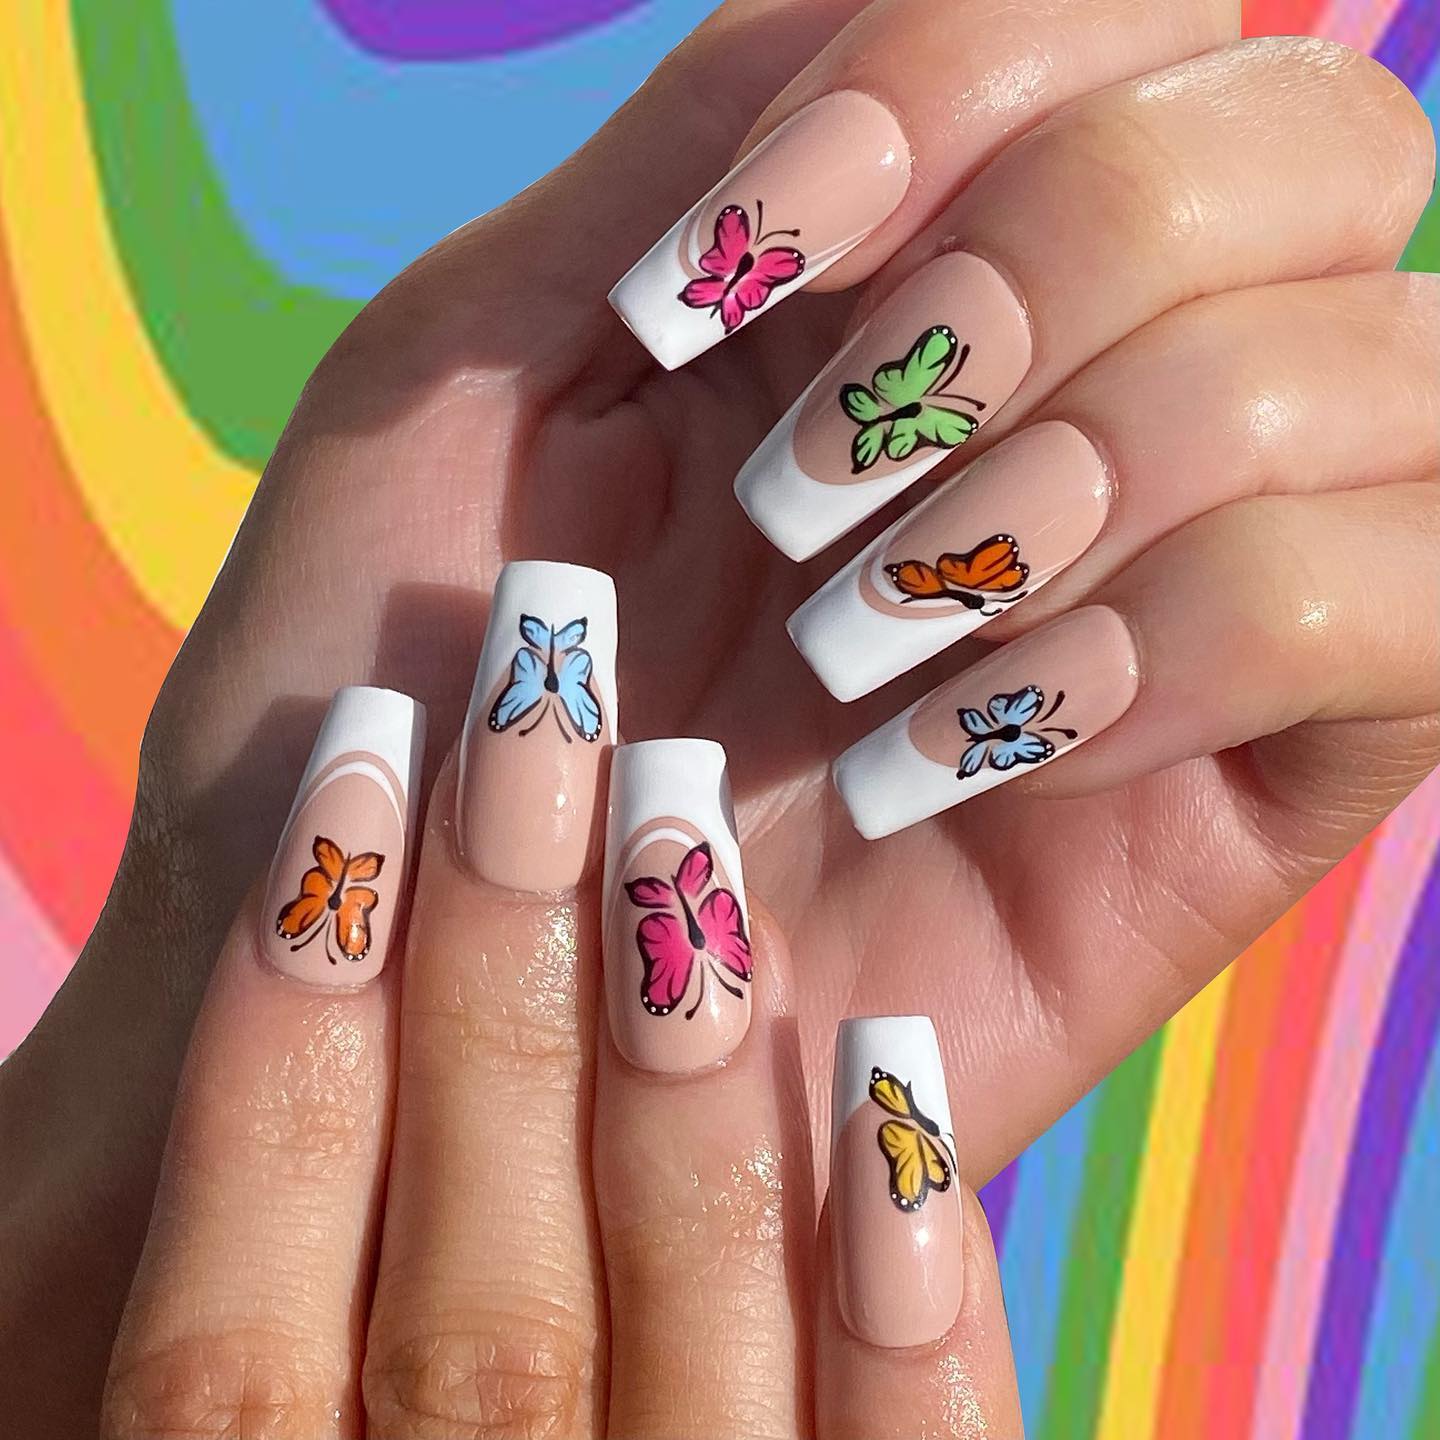 Isn't it great that two nails create one butterfly design? Just look how cute it is. This nail design is super cool for sunny days.